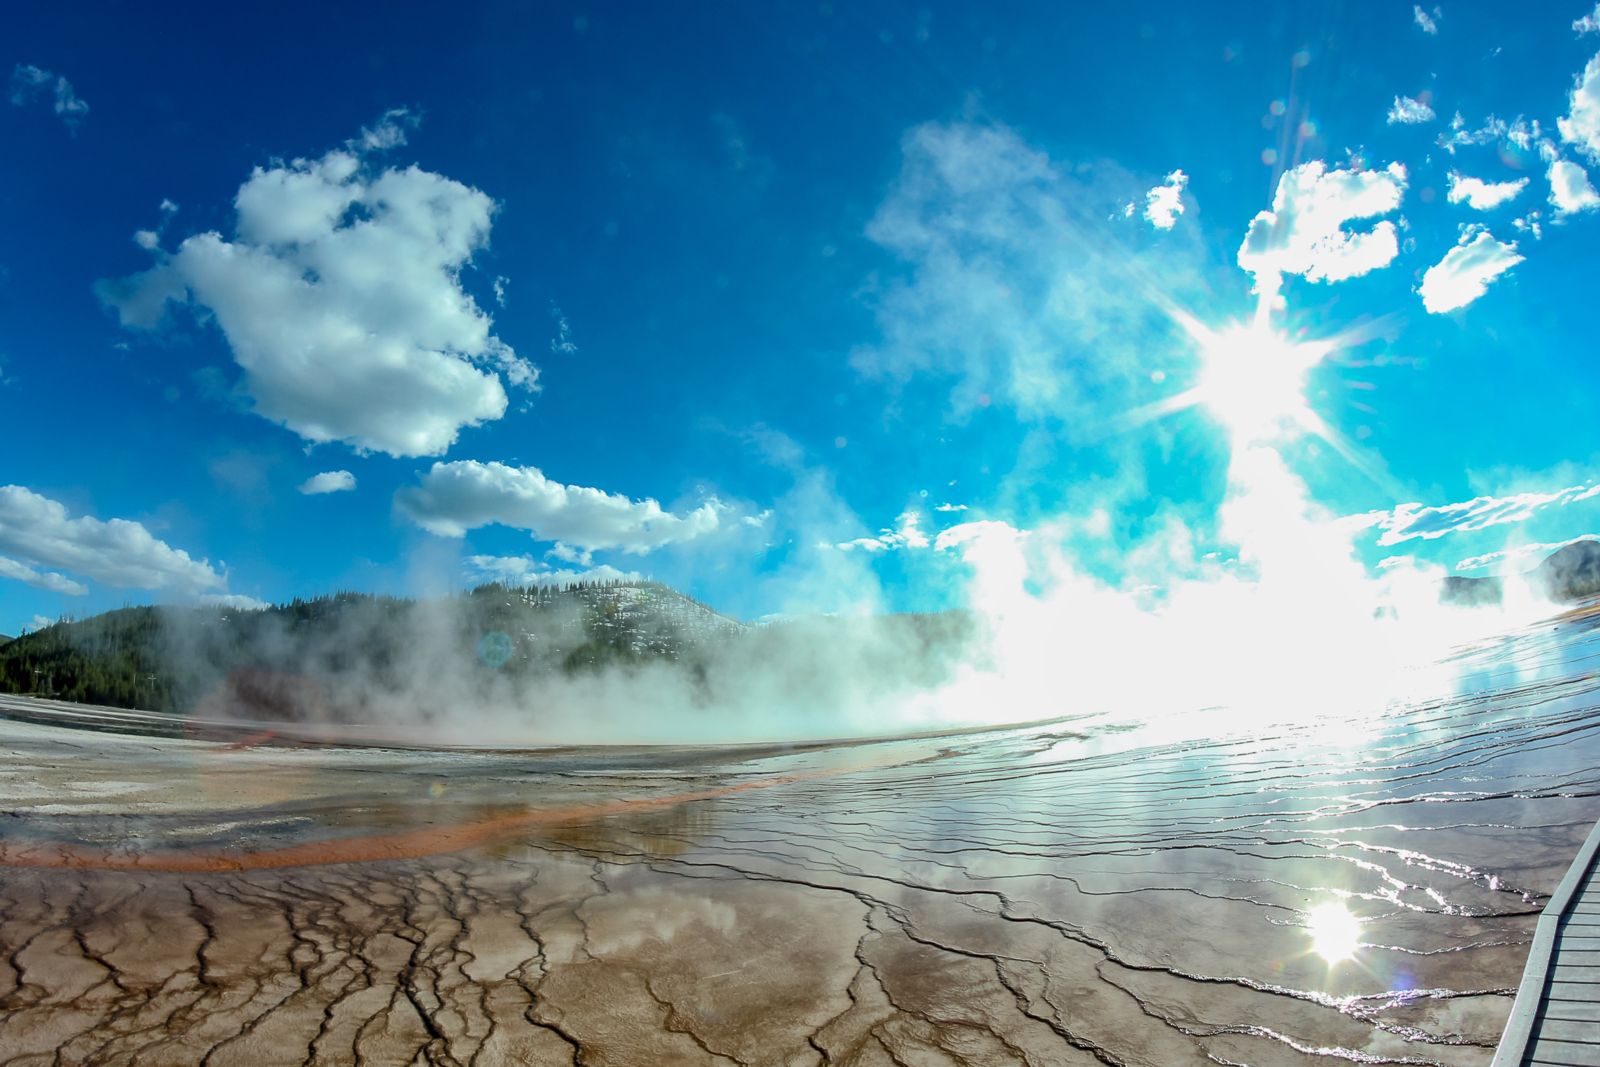 Algae mats, water runoff and steam make for stunning pictures of the thermal features. Photo © Tino Woodburn.